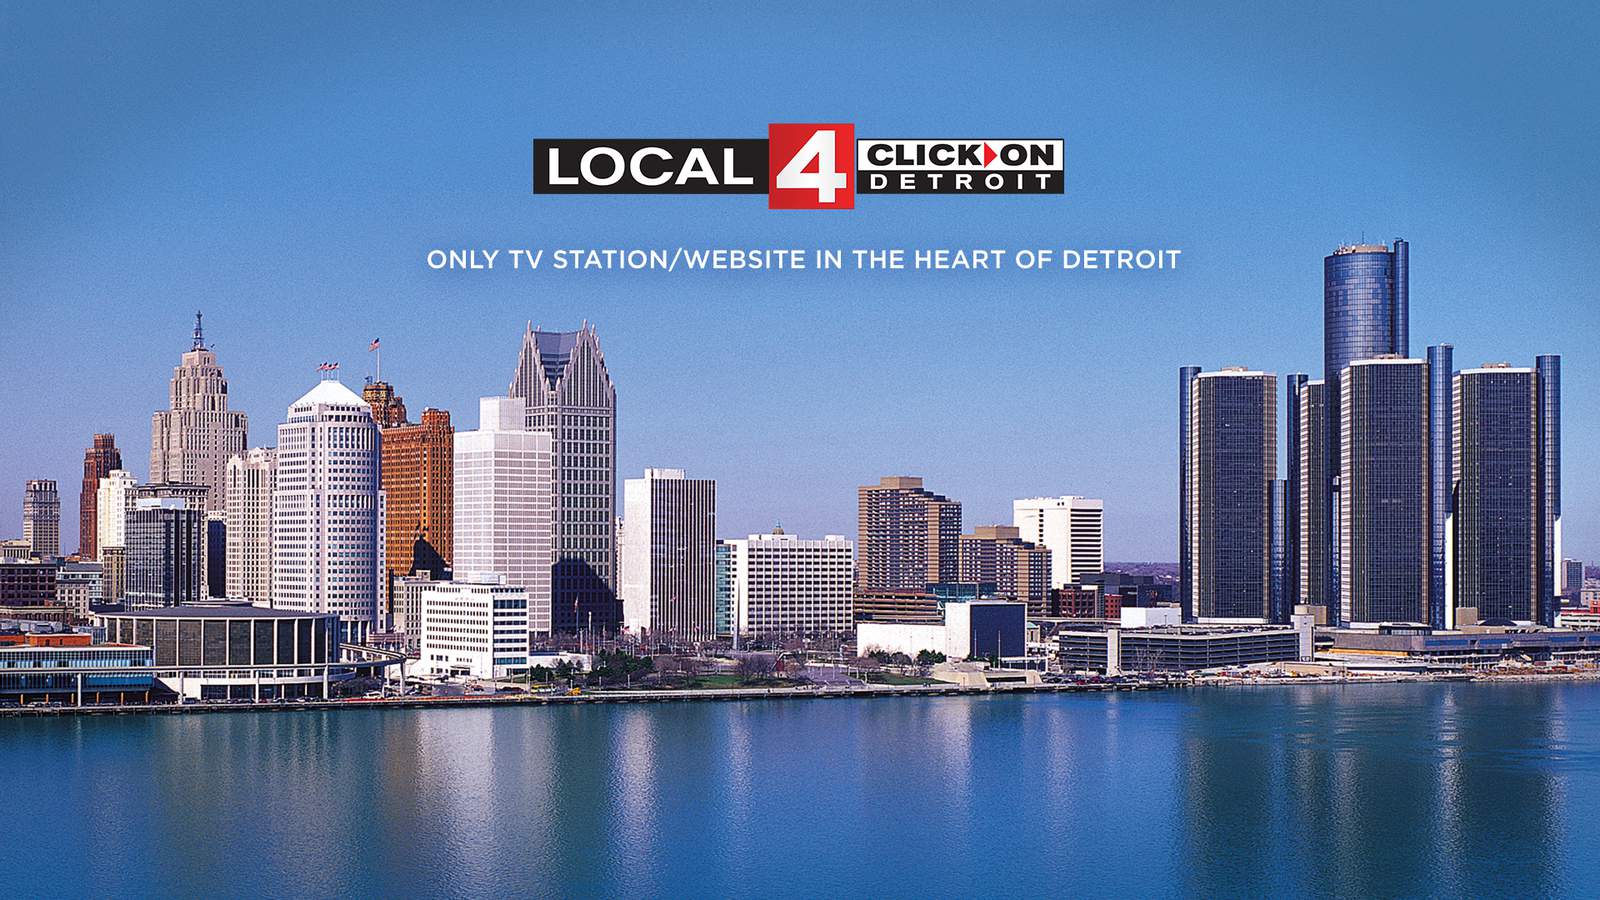 ClickOnDetroit Hits Highest Month Ever